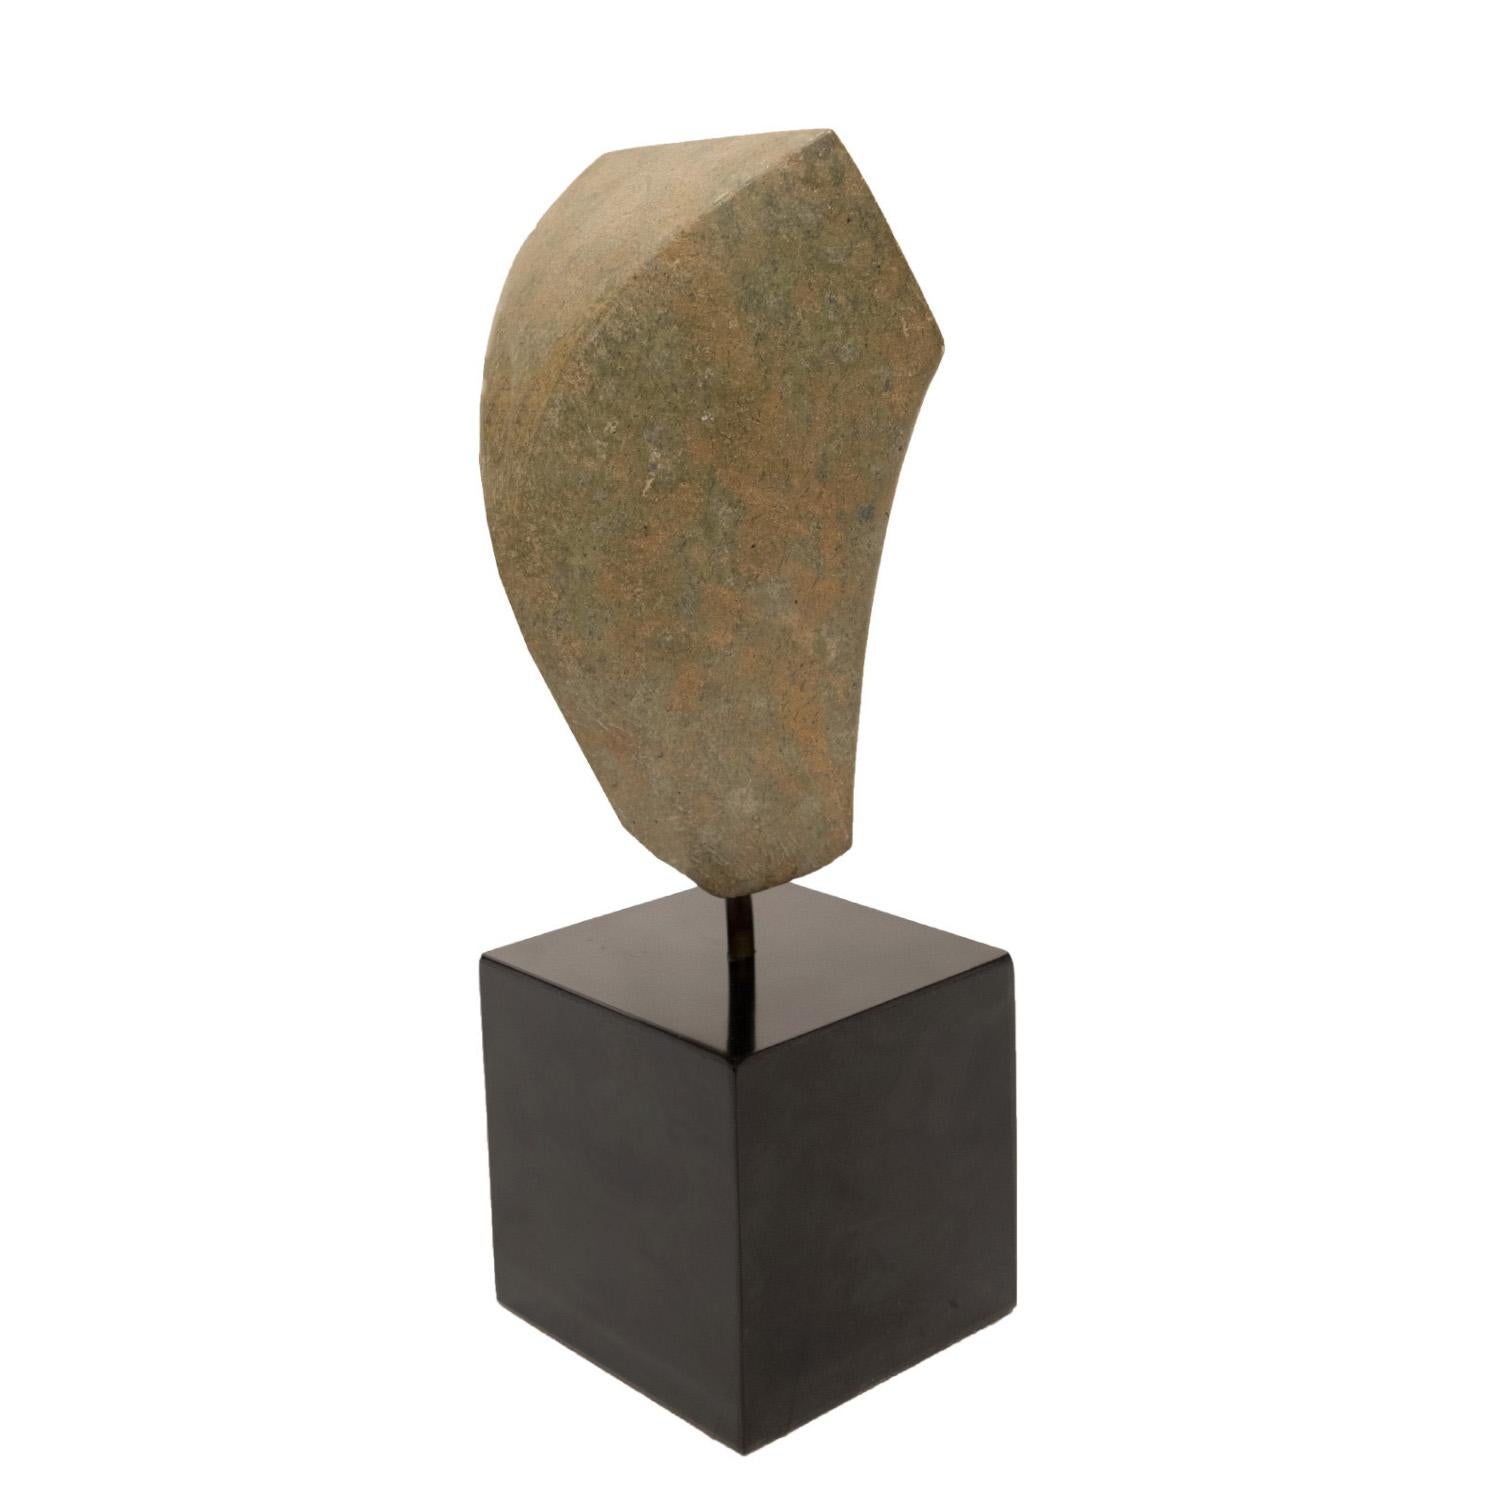 Hand carved sculpture “Lithic” in Green Italian granite on an ebonized wood base by Naomi Feinberg, American, 1970s.

Naomi Feinberg was a New York based sculptor who worked primarily in stone. She began sculpting in the 1940s and became